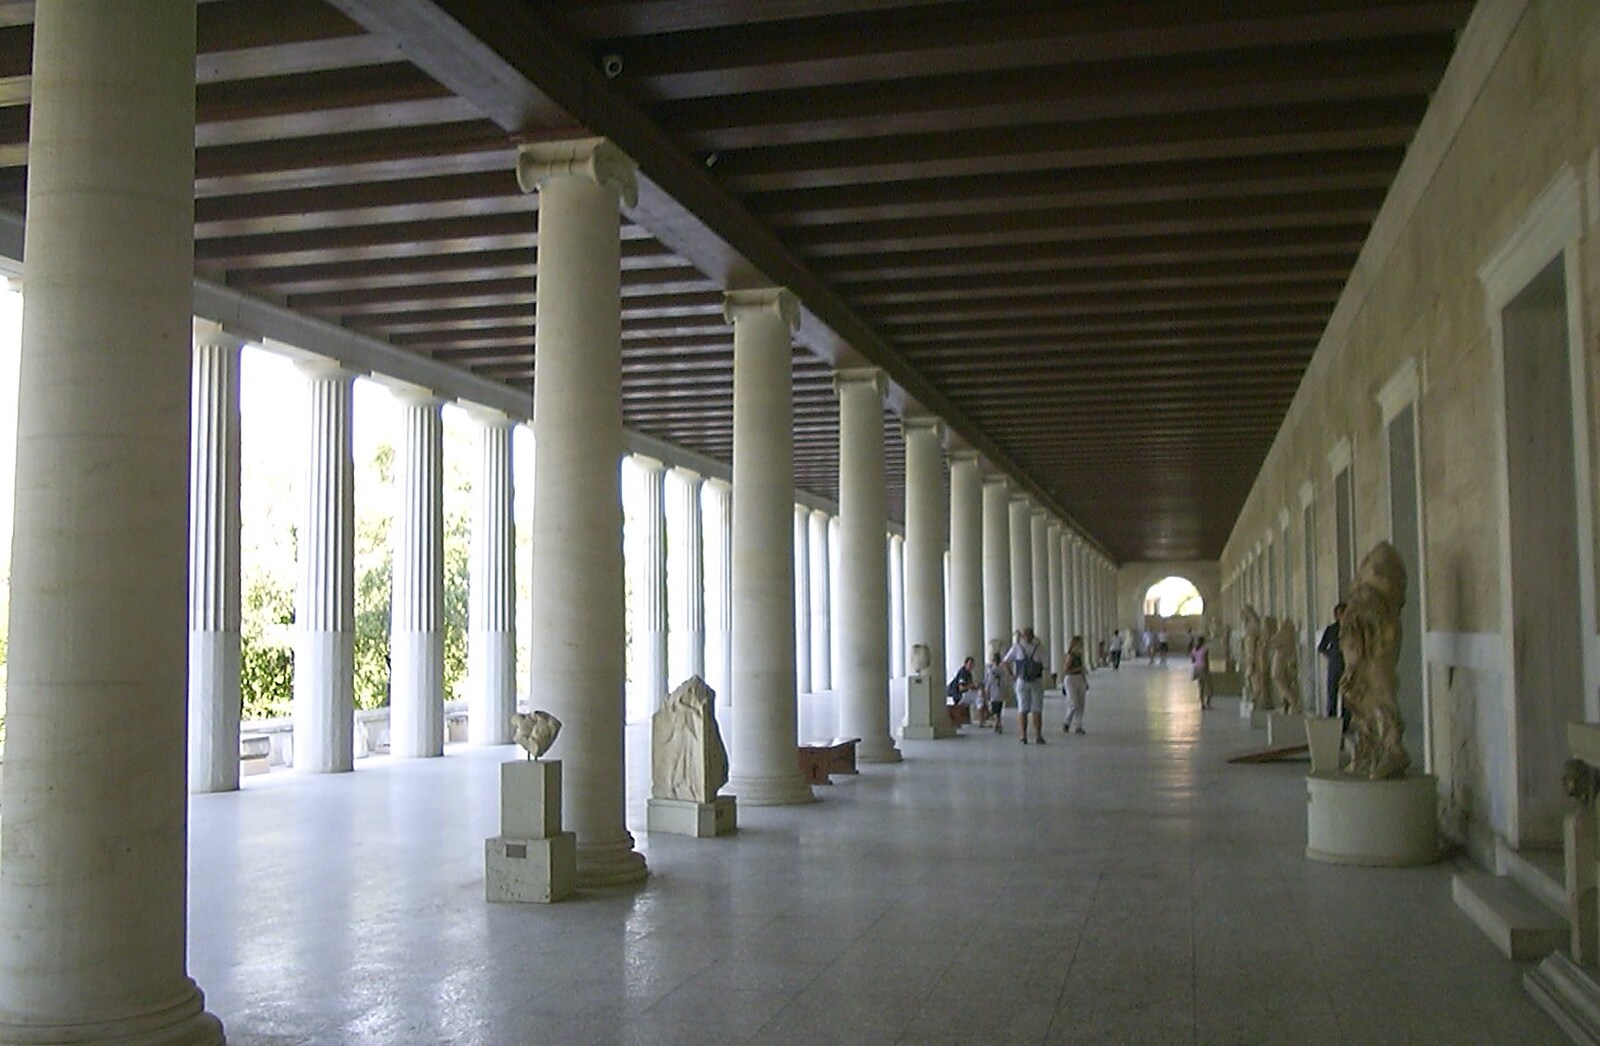 The Stoa of Attalos, rebuilt by the American School from A Postcard From Athens: A Day Trip to the Olympics, Greece - 19th August 2004